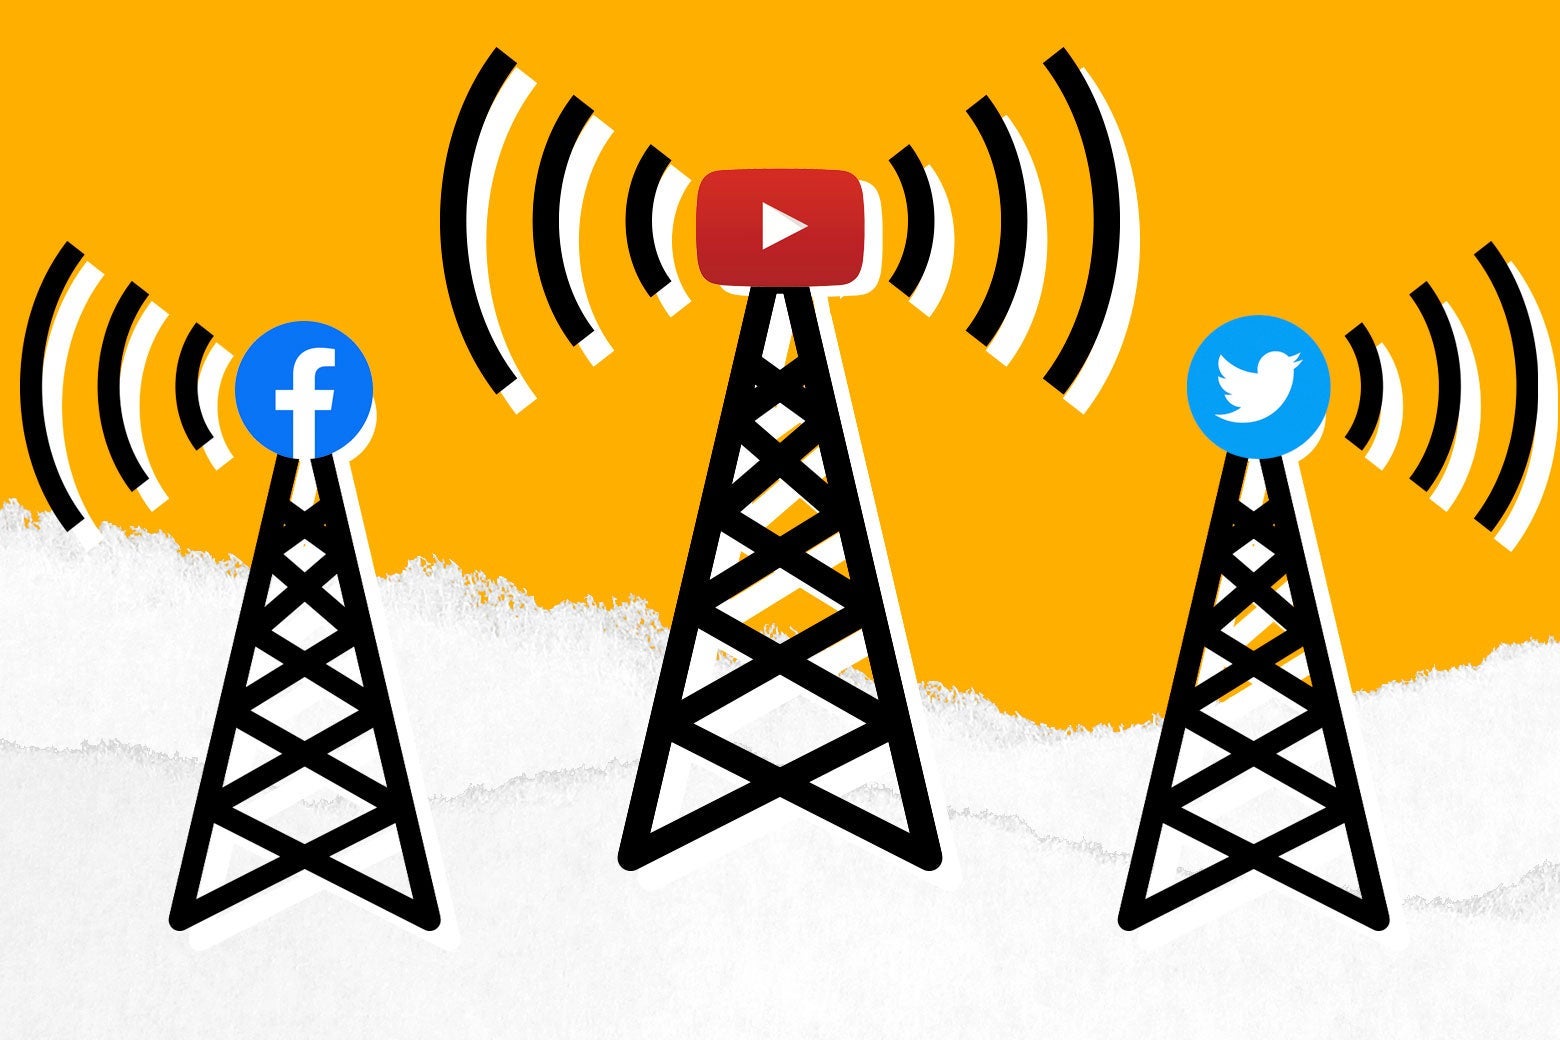 Radio towers with the corporate logos of Facebook, YouTube, and Twitter.